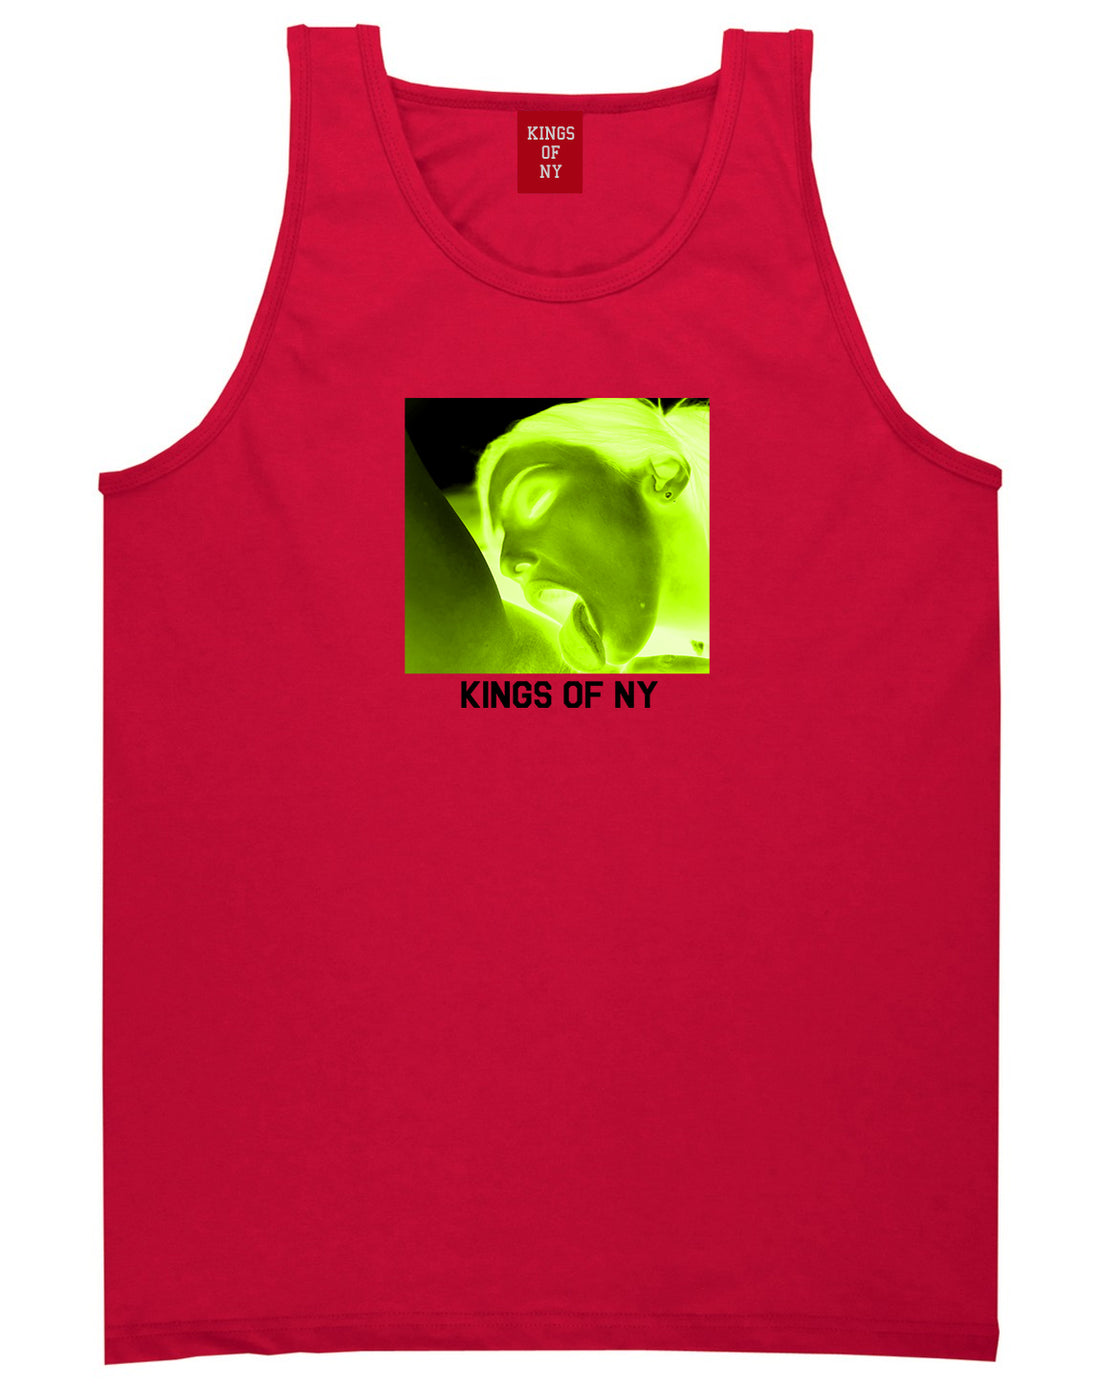 Taste Neon Green Yellow Mens Tank Top Shirt Red by Kings Of NY